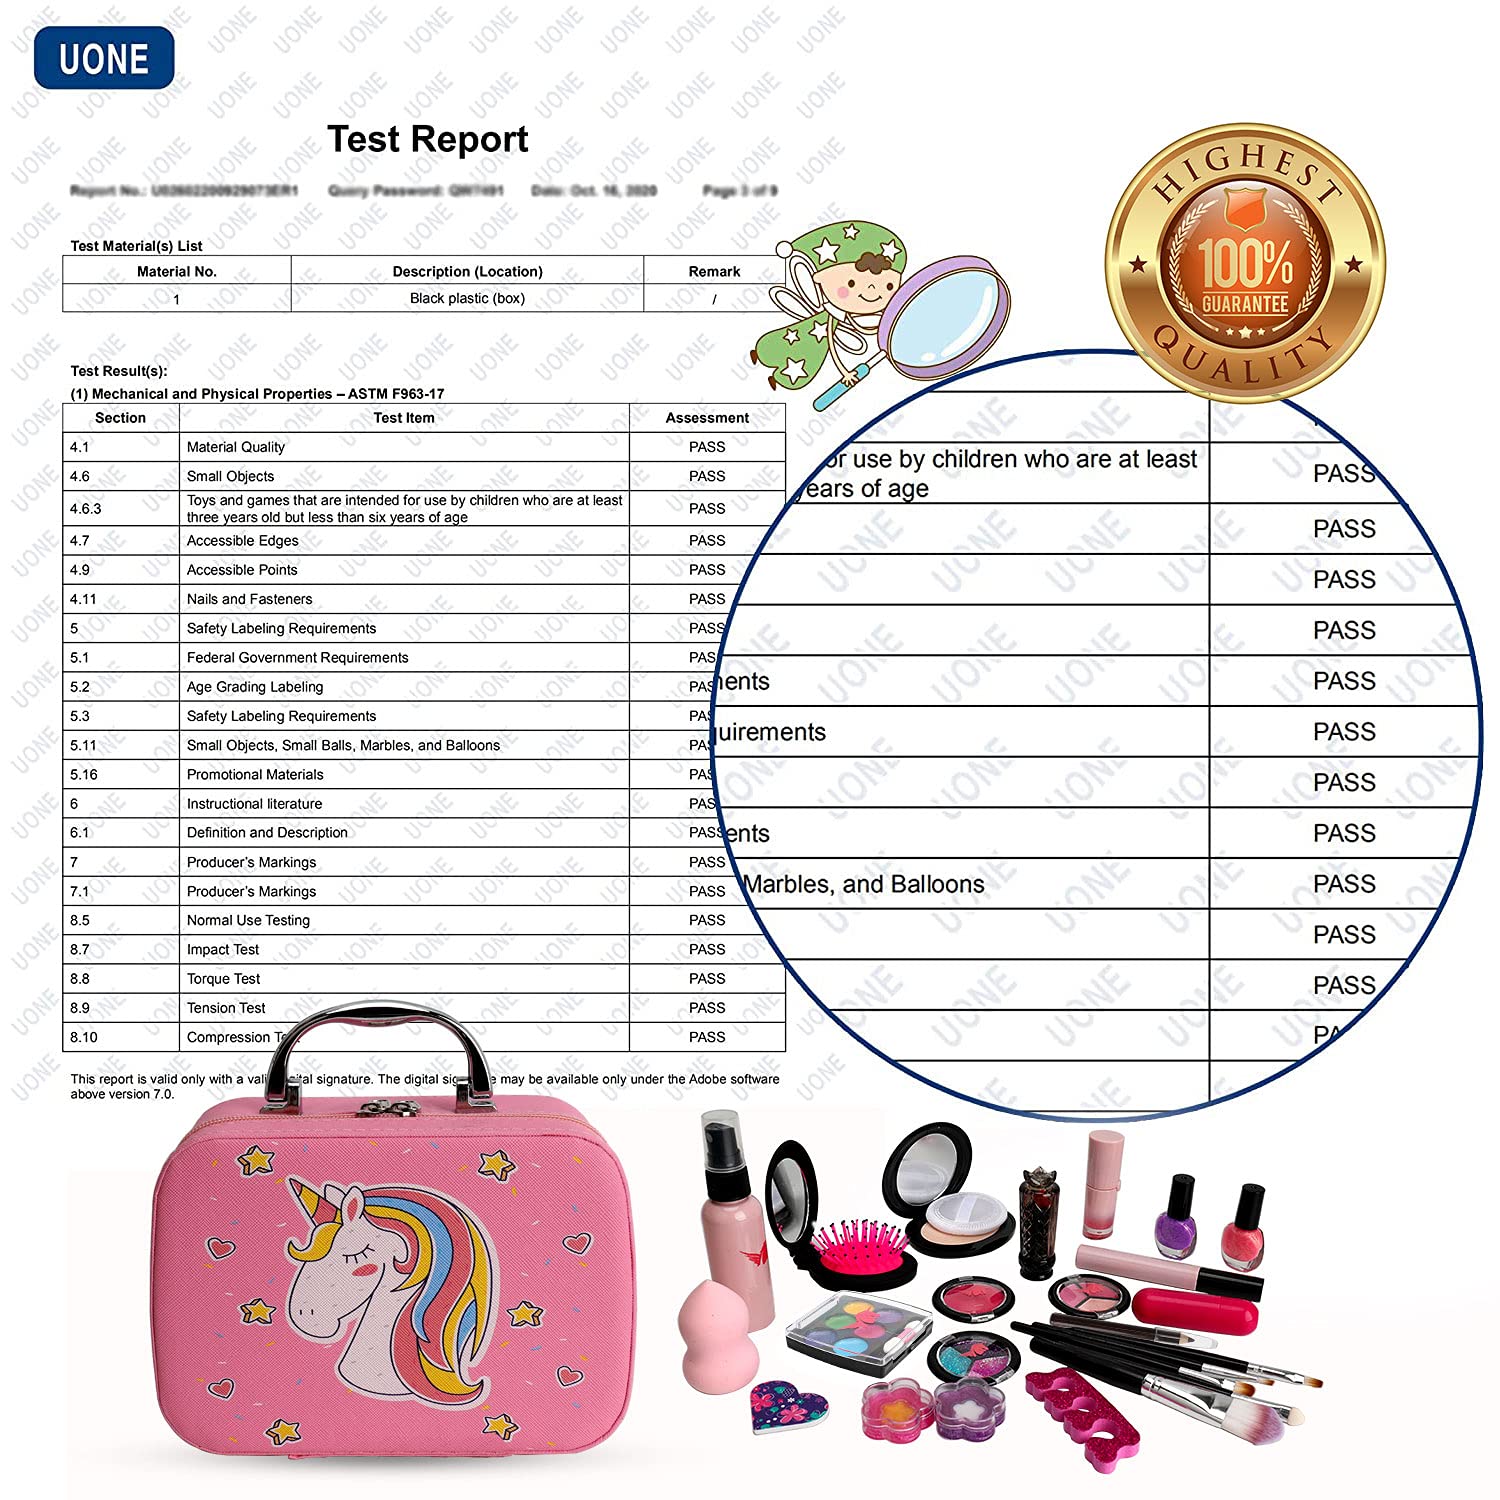 Flybay Kids Makeup Kit for Girls, Real Makeup Set, Washable Makeup Kit Toys for Little Girls Child Pretend Play Makeup for 4 5 6 7 Years Old Birthday Gifts Toys.